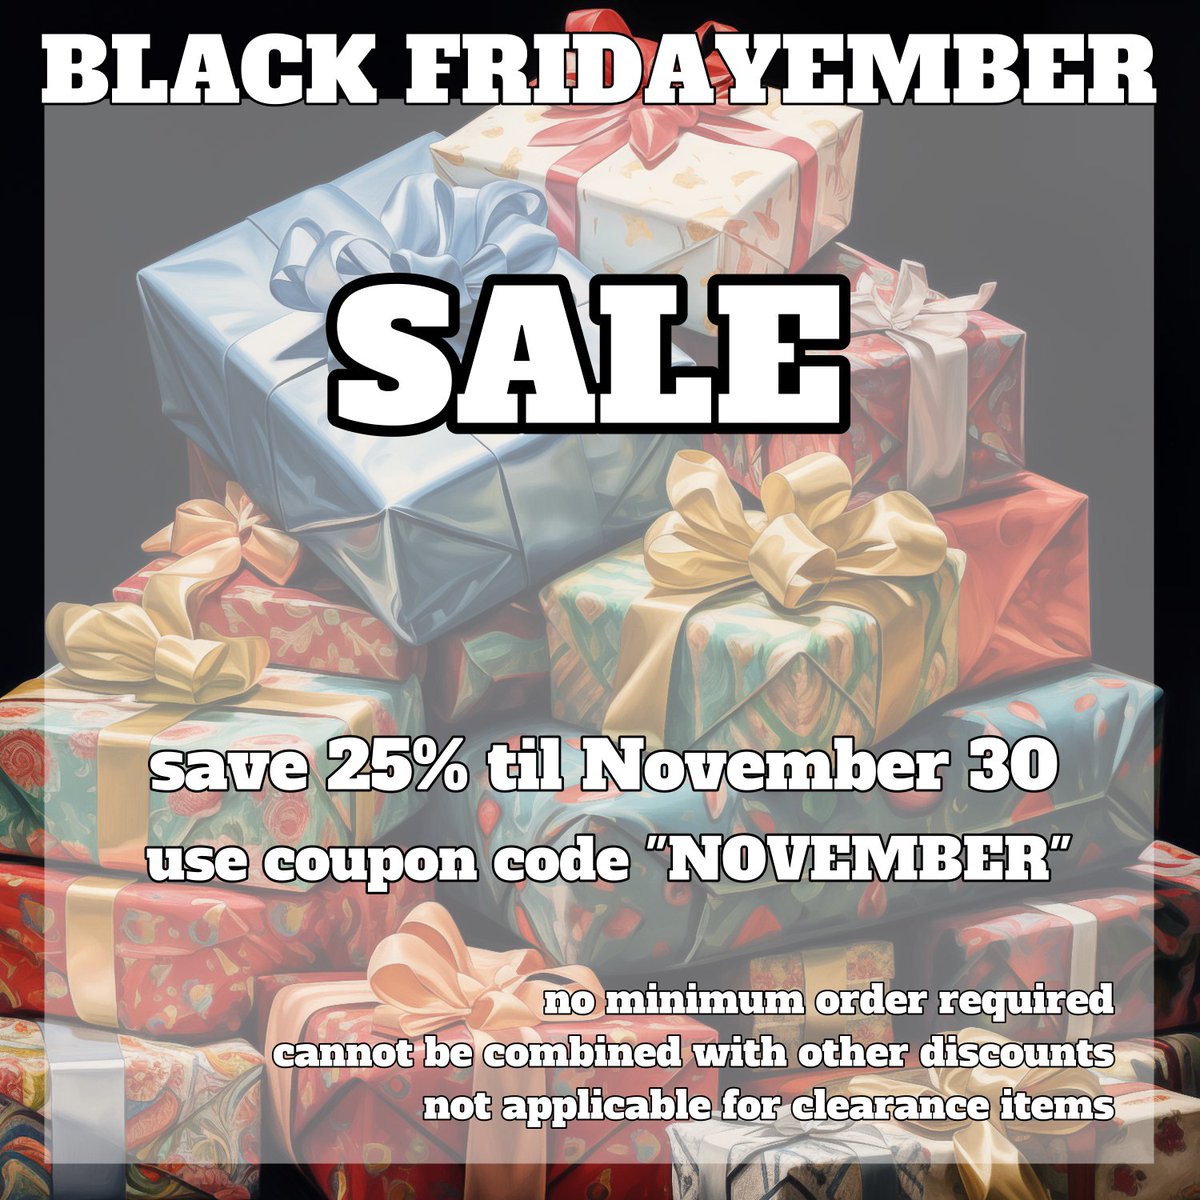 Our #BlackFriday ends at midnight tonight! Save 25% NOW at SensualElegance.com 

#sale #lingerie #shoesaddict #clothingshop